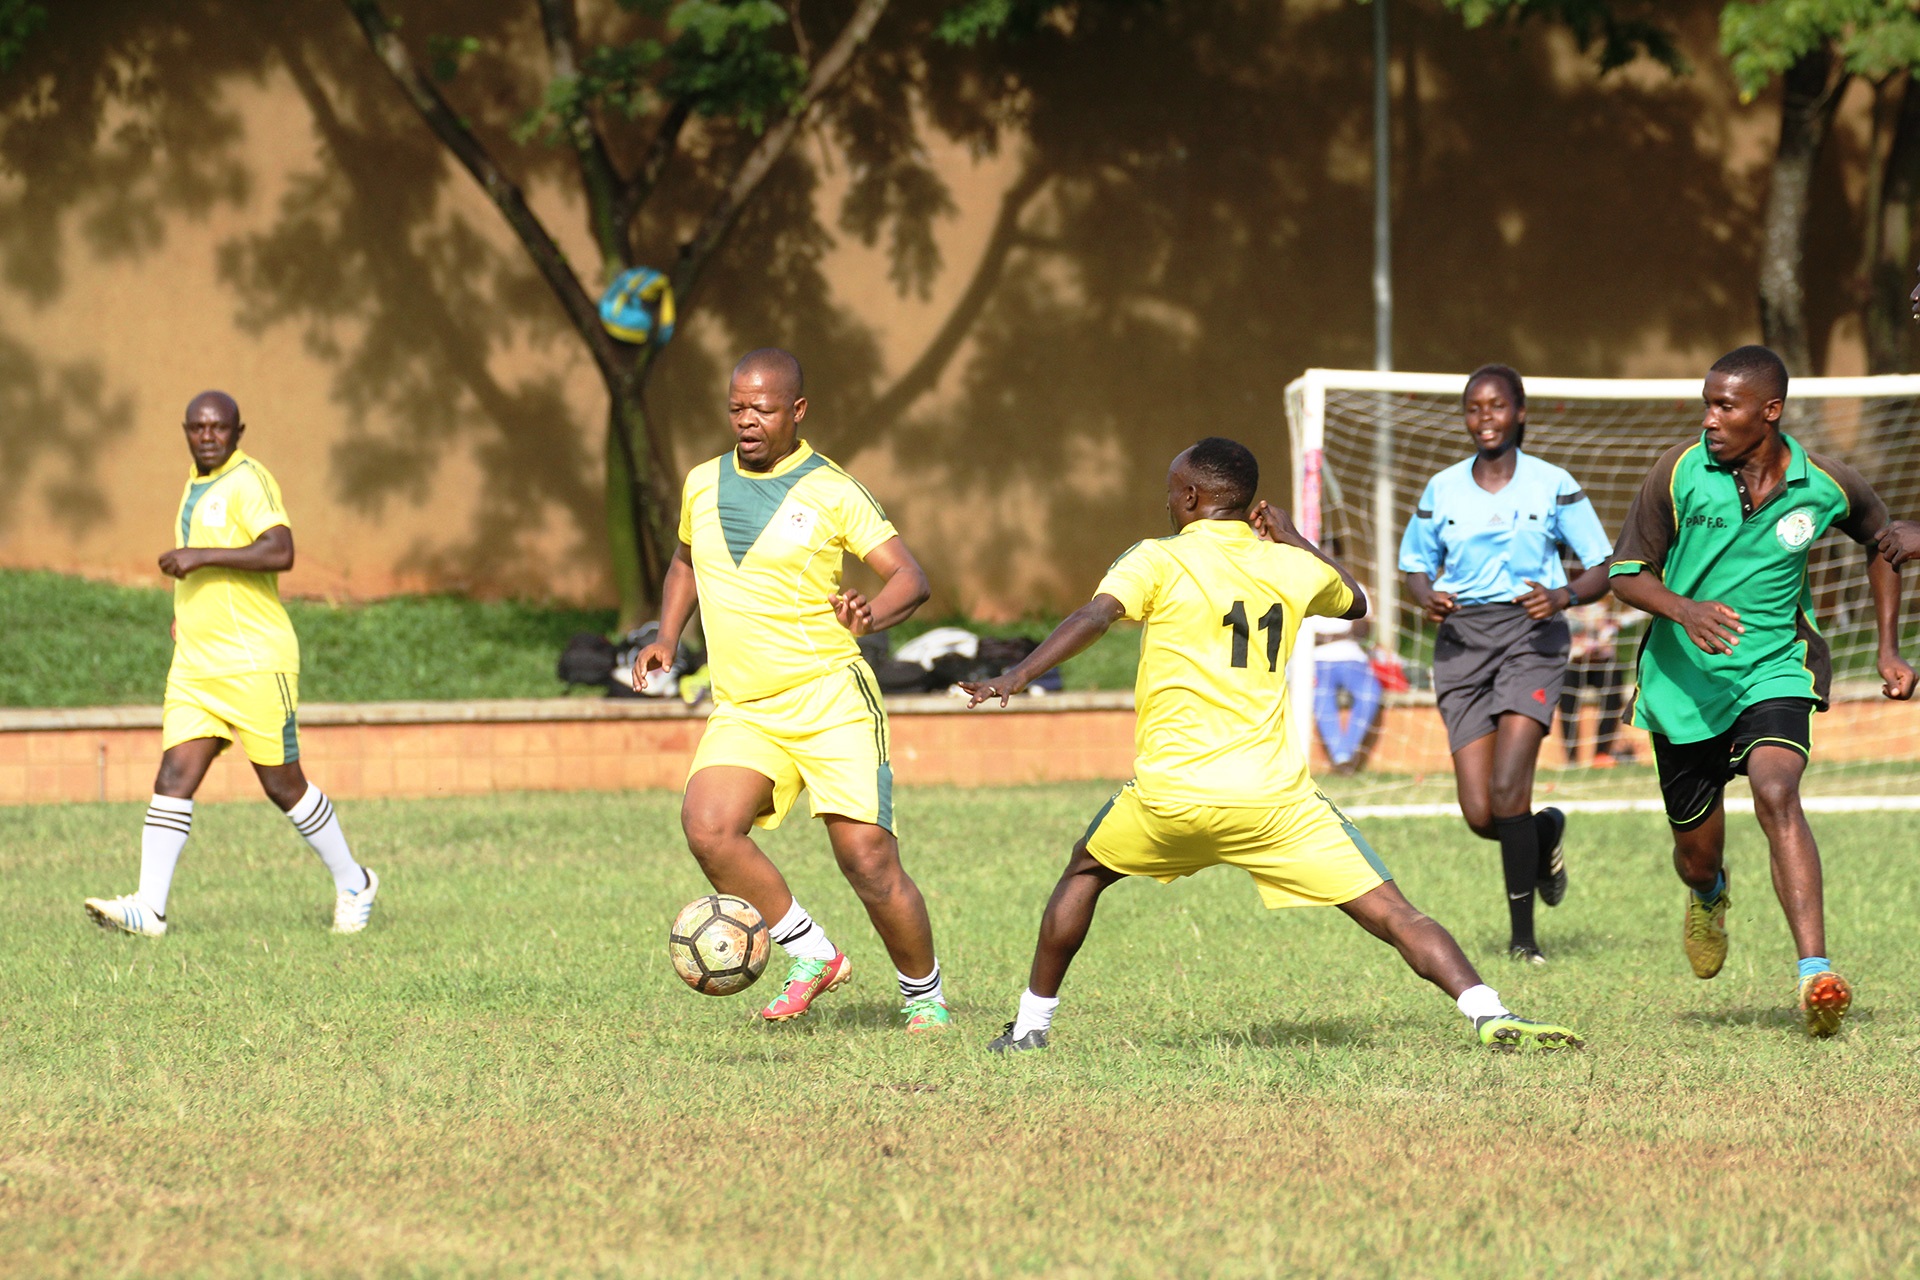 What You Missed At Fufa Corporate Tournament 2018: Pap Fc,Magogo Lock Horns: